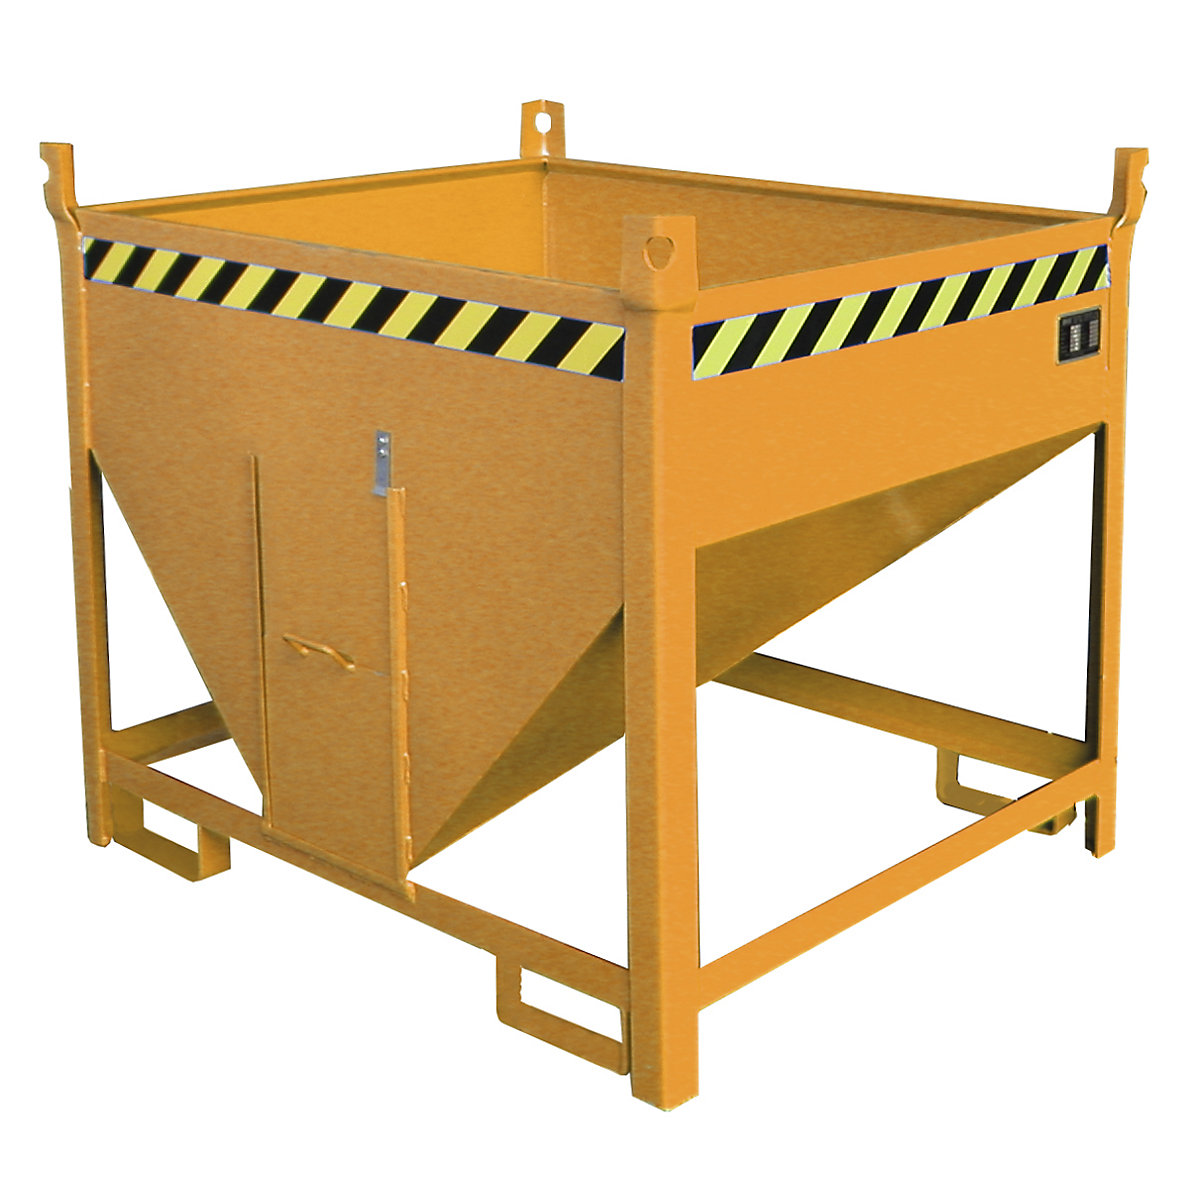 Silo container – eurokraft pro, capacity 0.50 m³, sliding trap on front side, yellow orange RAL 2000-7